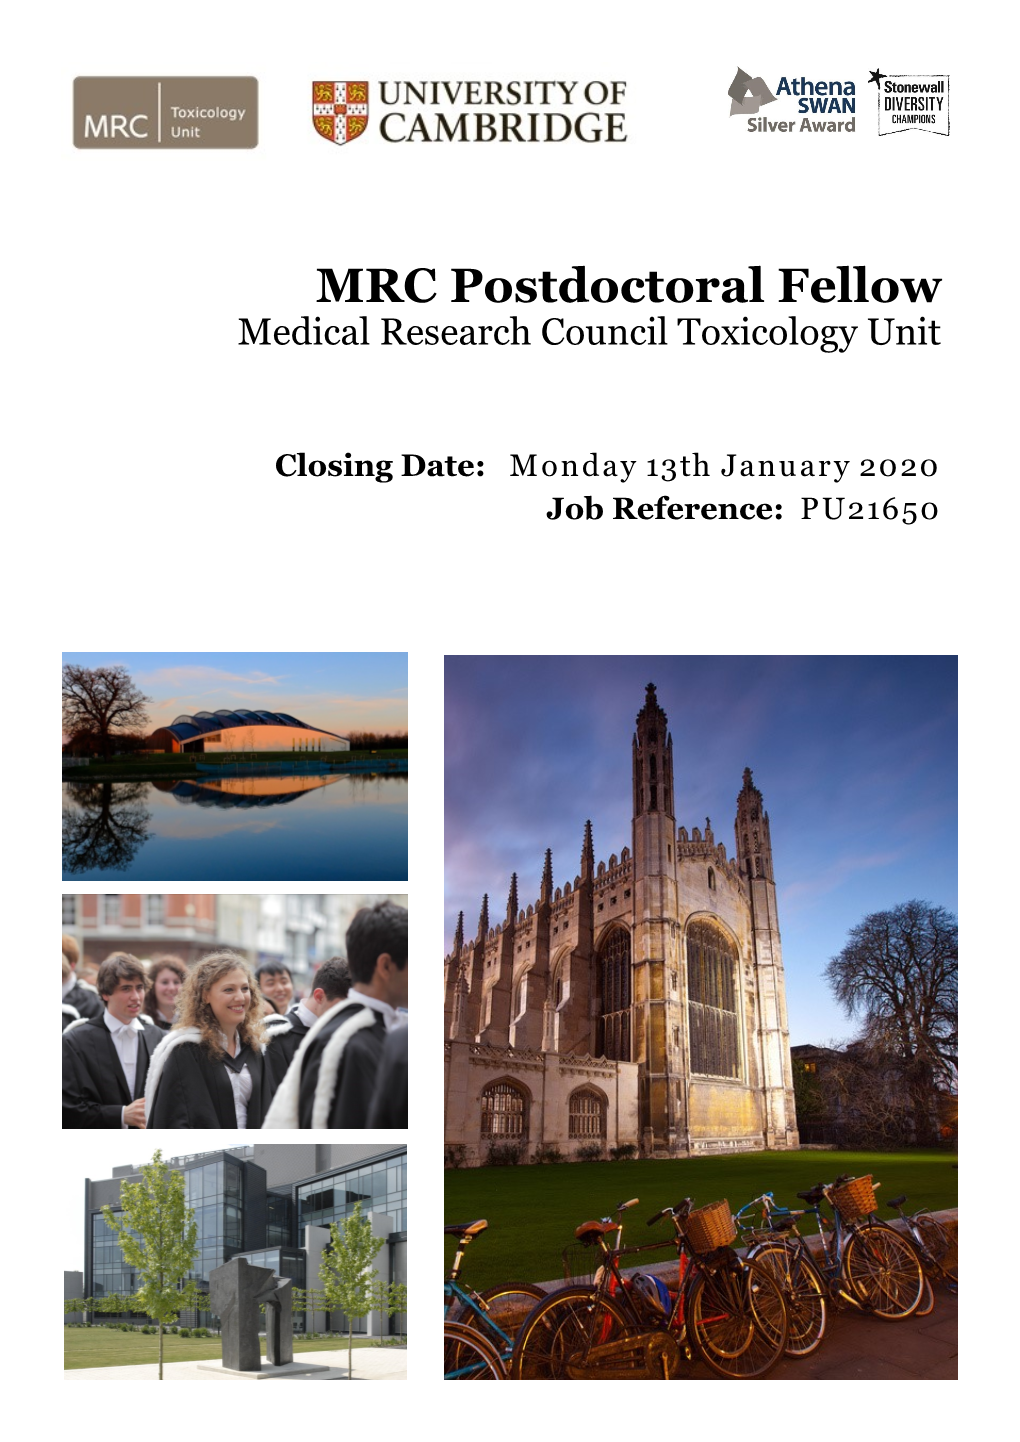 MRC Postdoctoral Fellow Medical Research Council Toxicology Unit